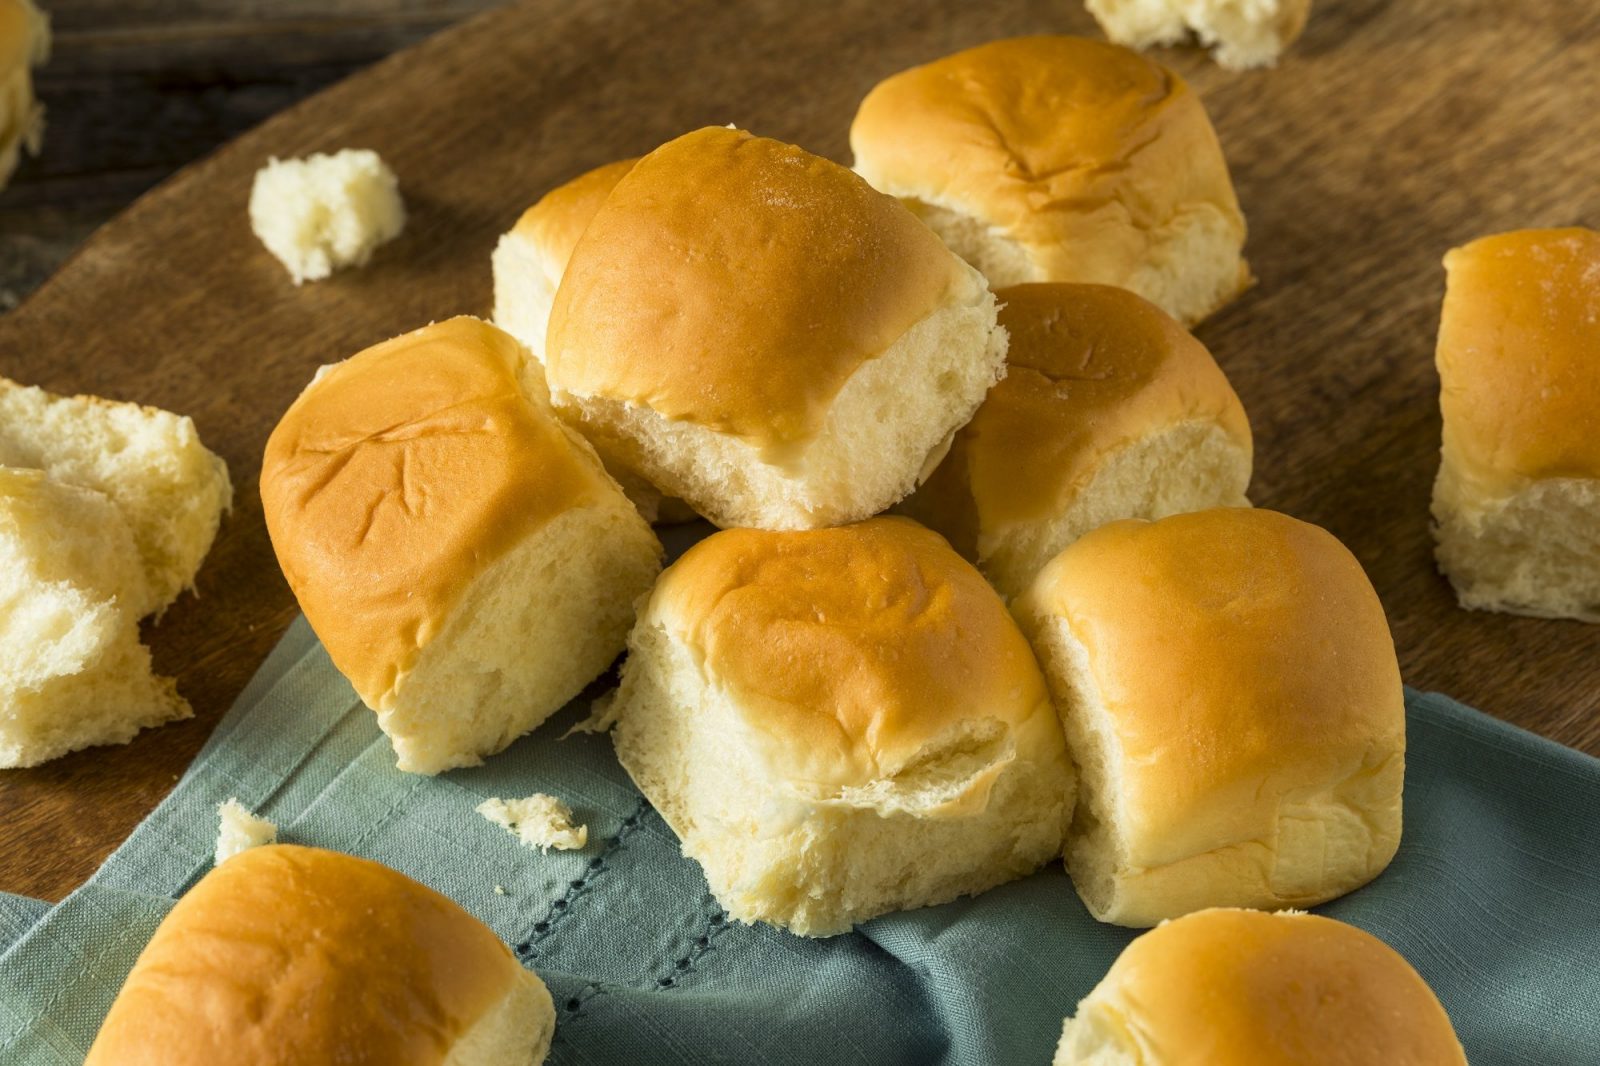 🥖 How Many Baked Goods Have You Tried from Around the World? Hawaiian bread buns rolls